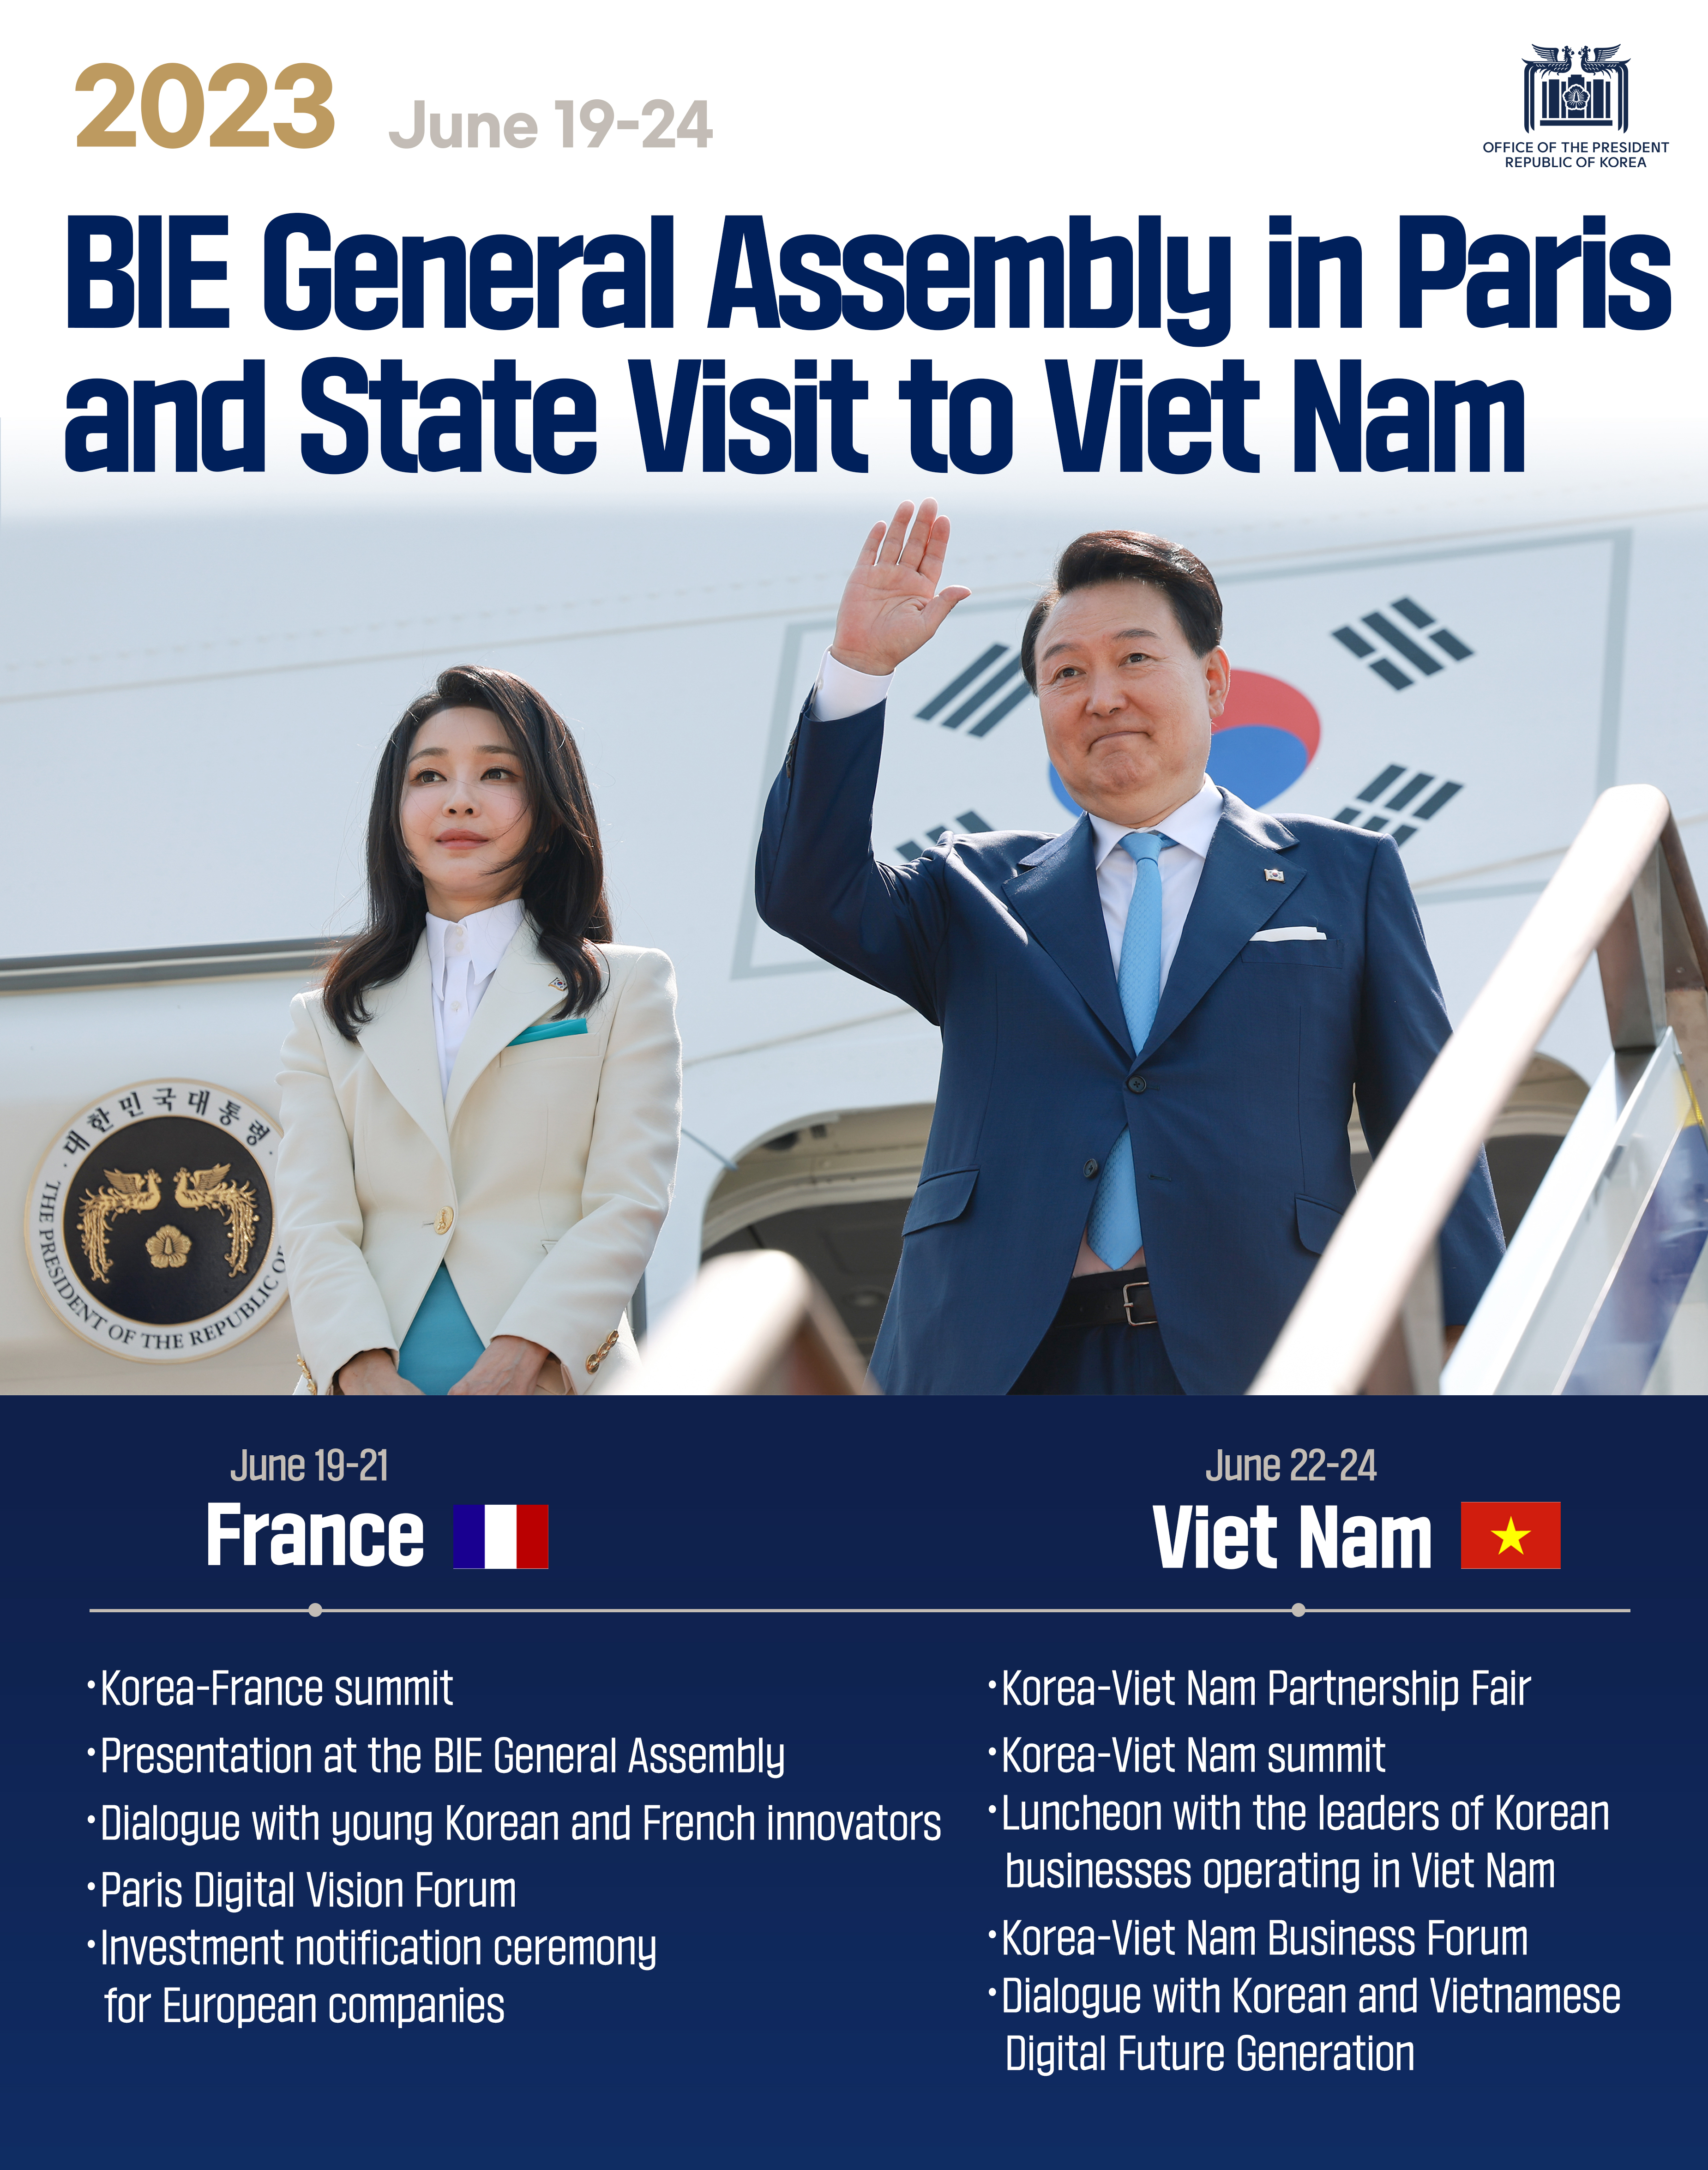 BIE General Assembly in Paris and State Visit to Viet Nam